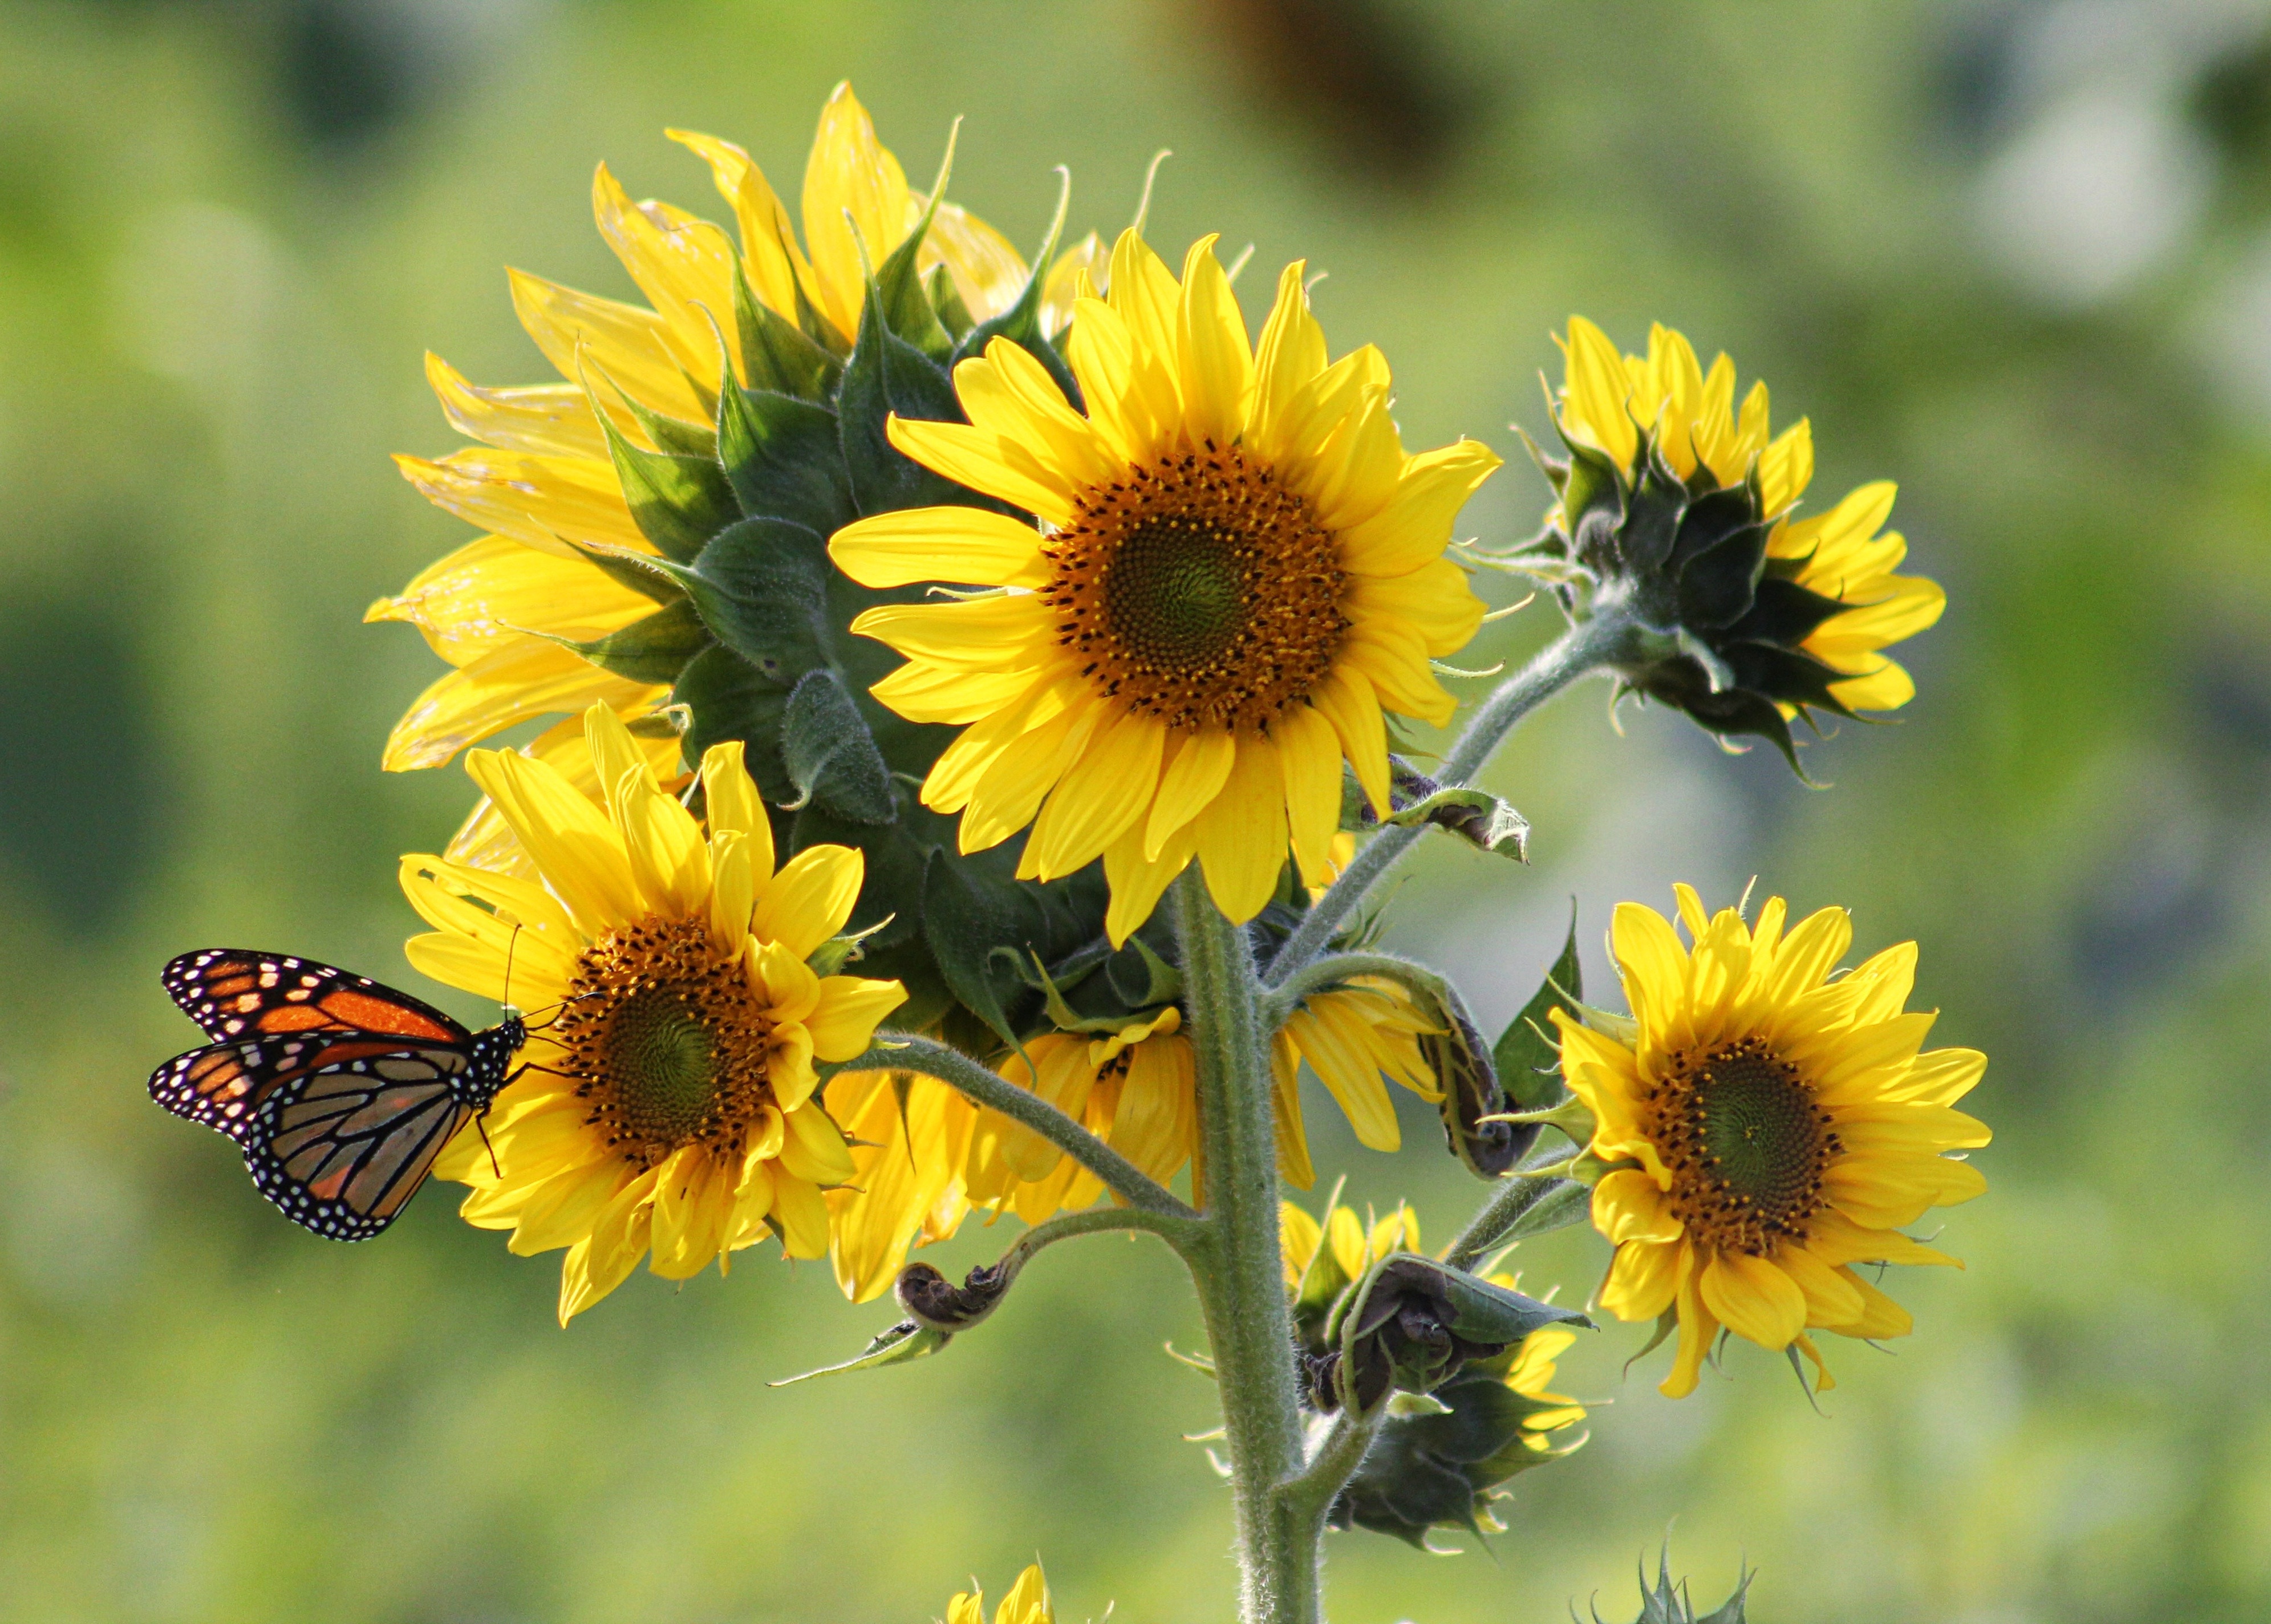 monarch butterfly perched on sunflowers in shallow focus lens